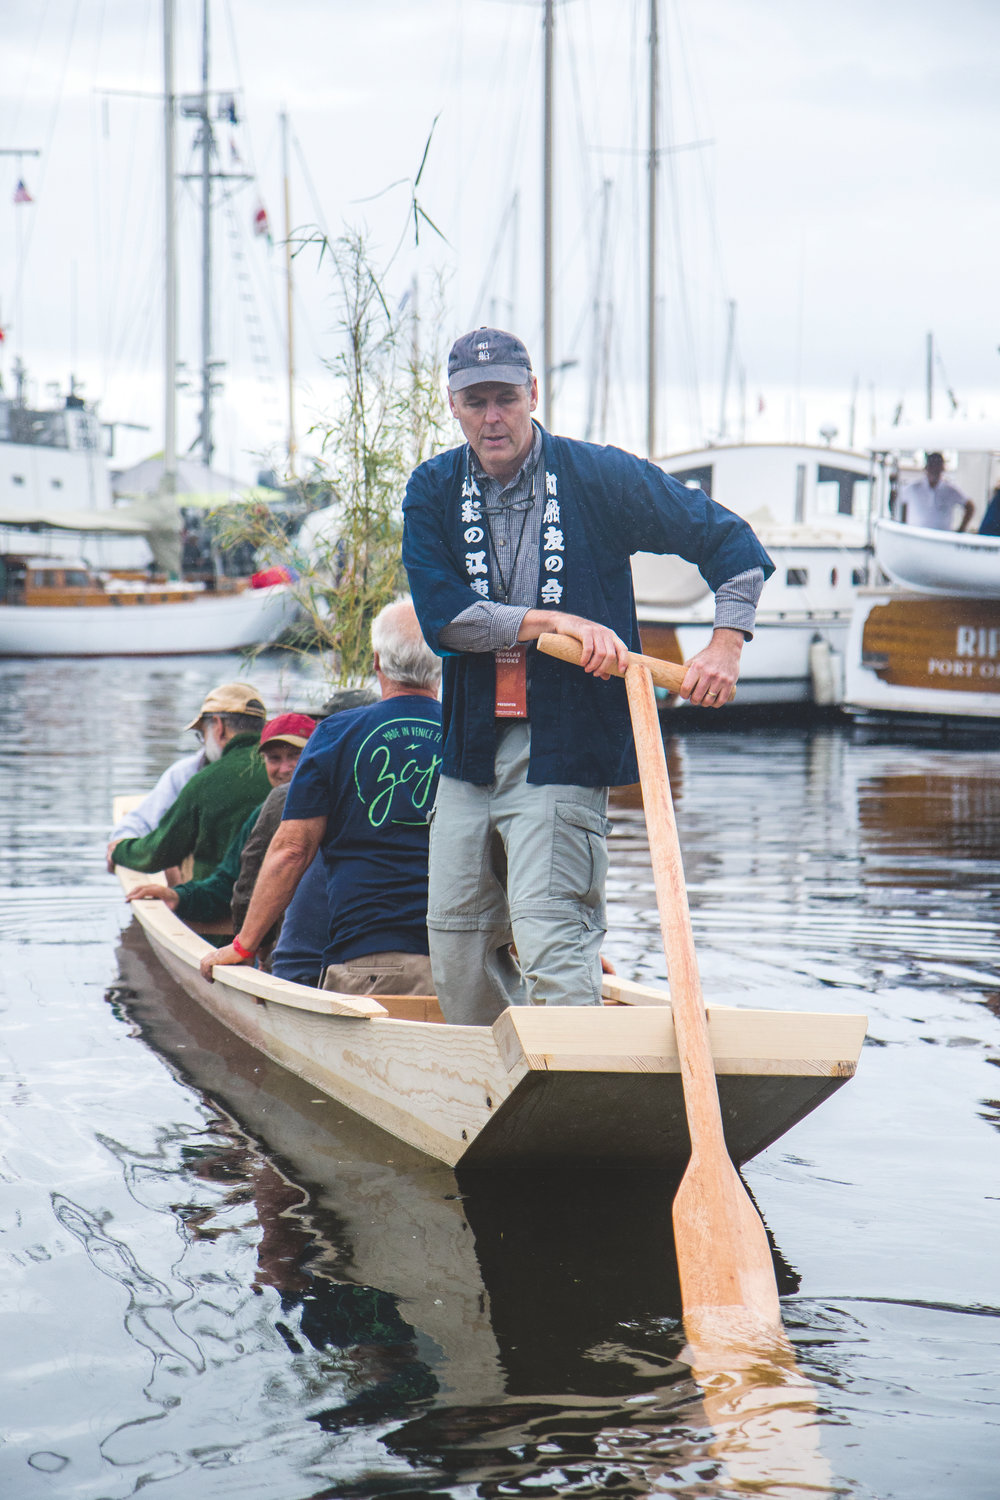 Douglas Brooks uses the sculling oar to launch the Shinano river boat with the boat builders.